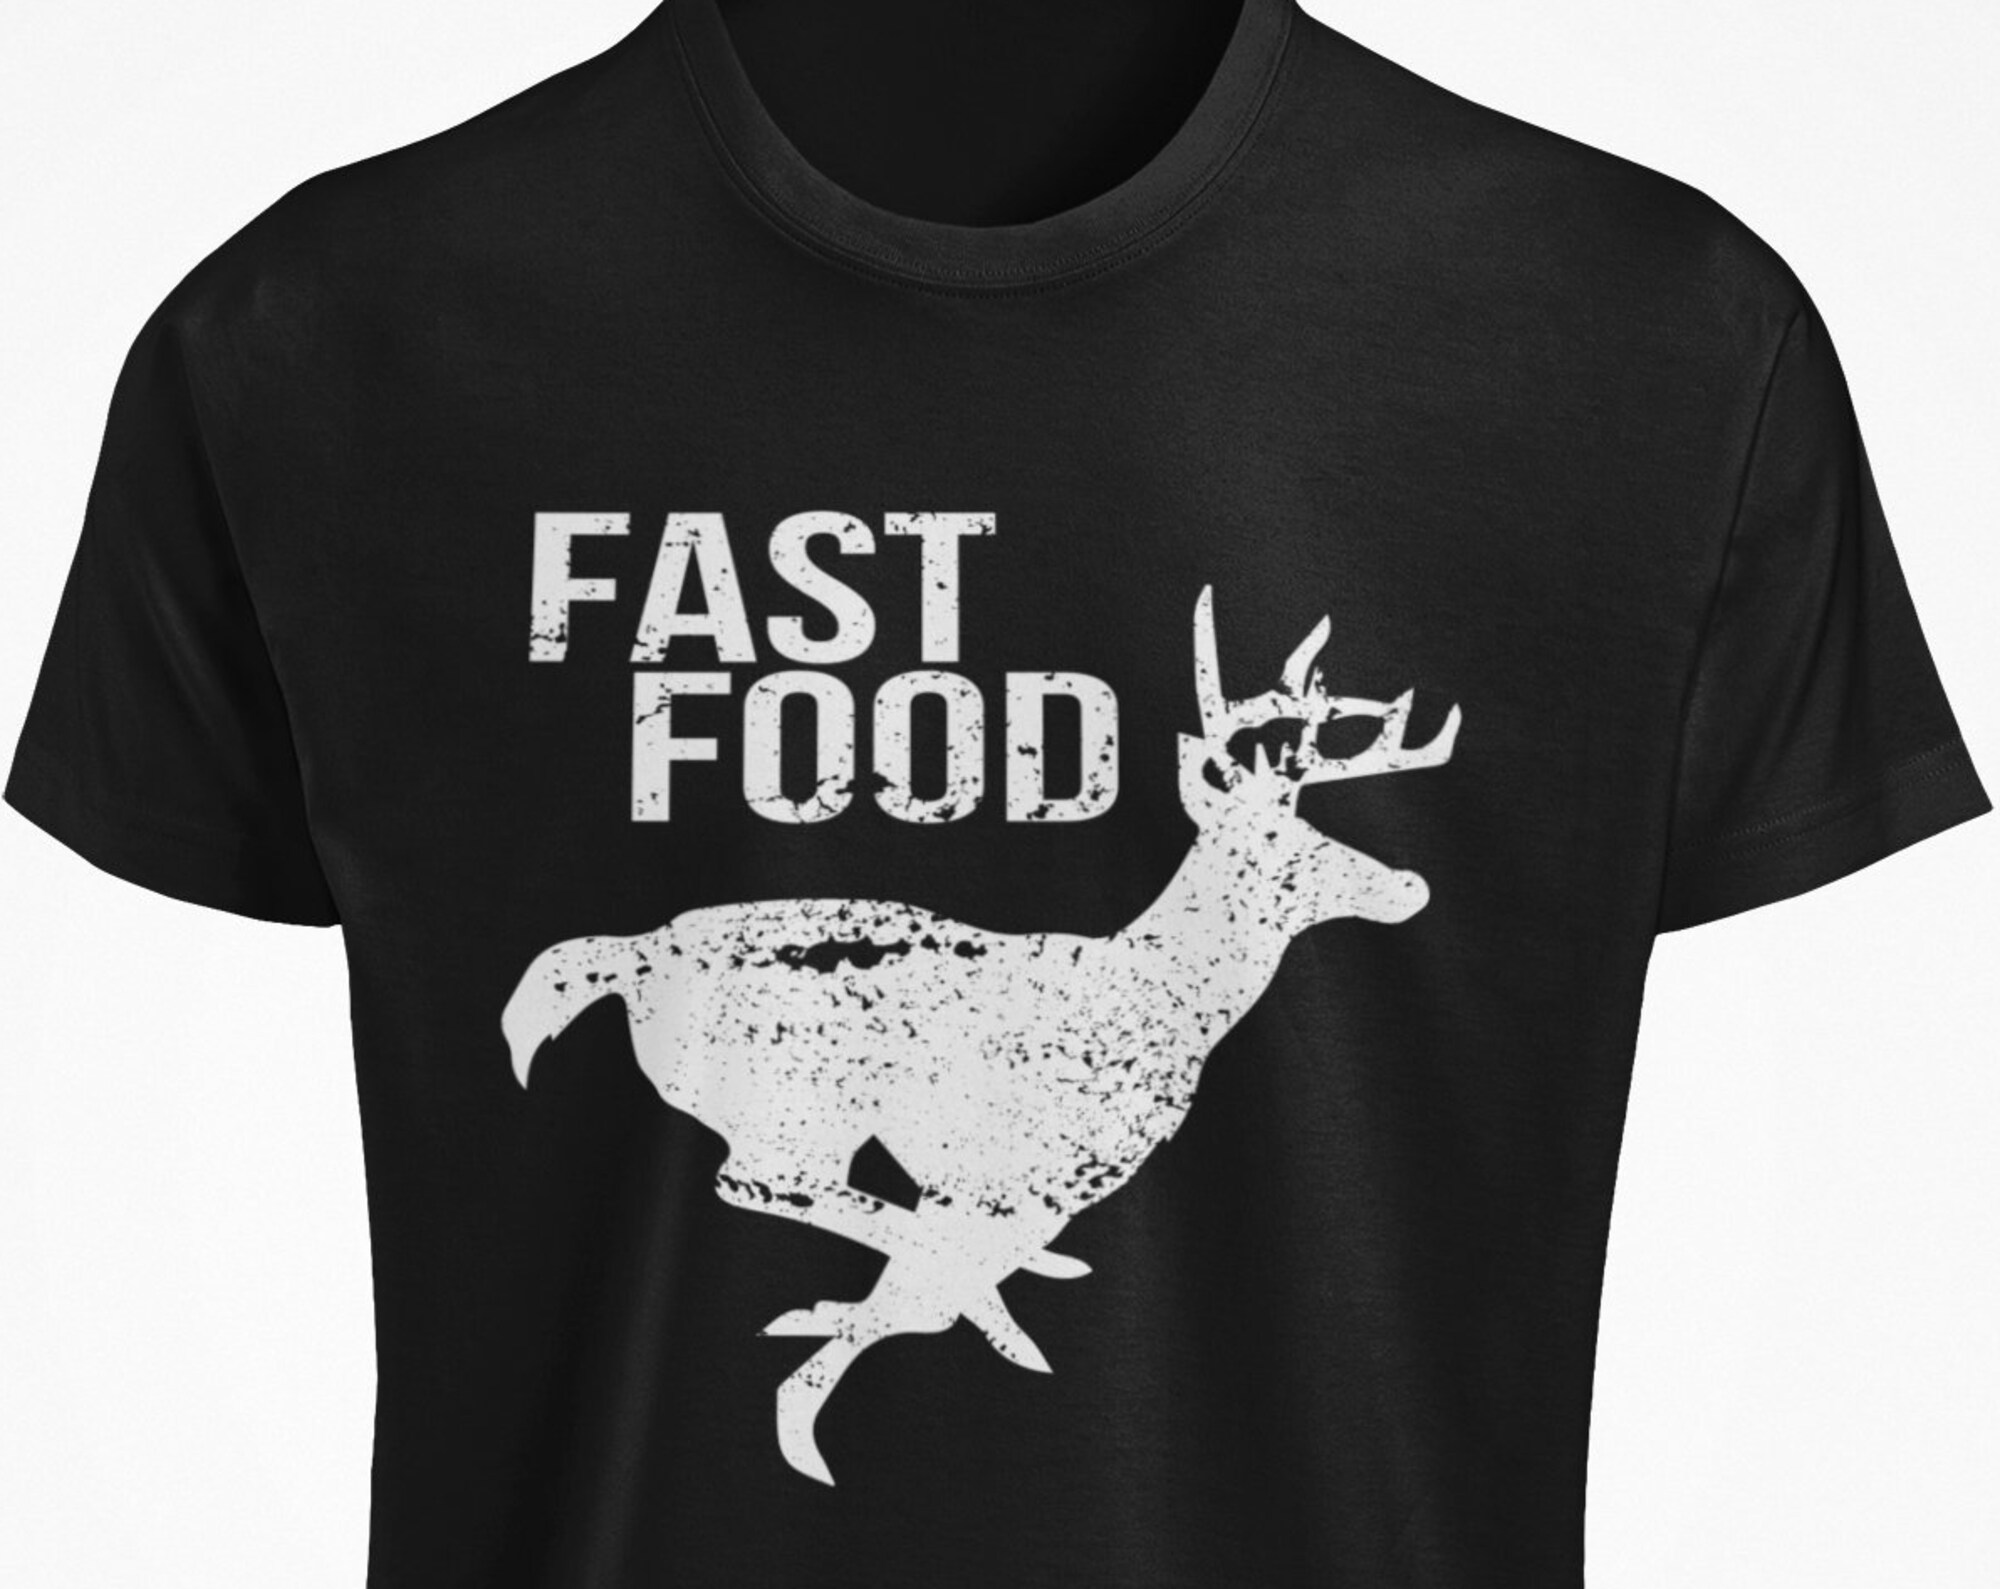 Discover Hunting Gifts for Men, Hunting T-Shirts, Deer T Shirt, Fast Food Shirt